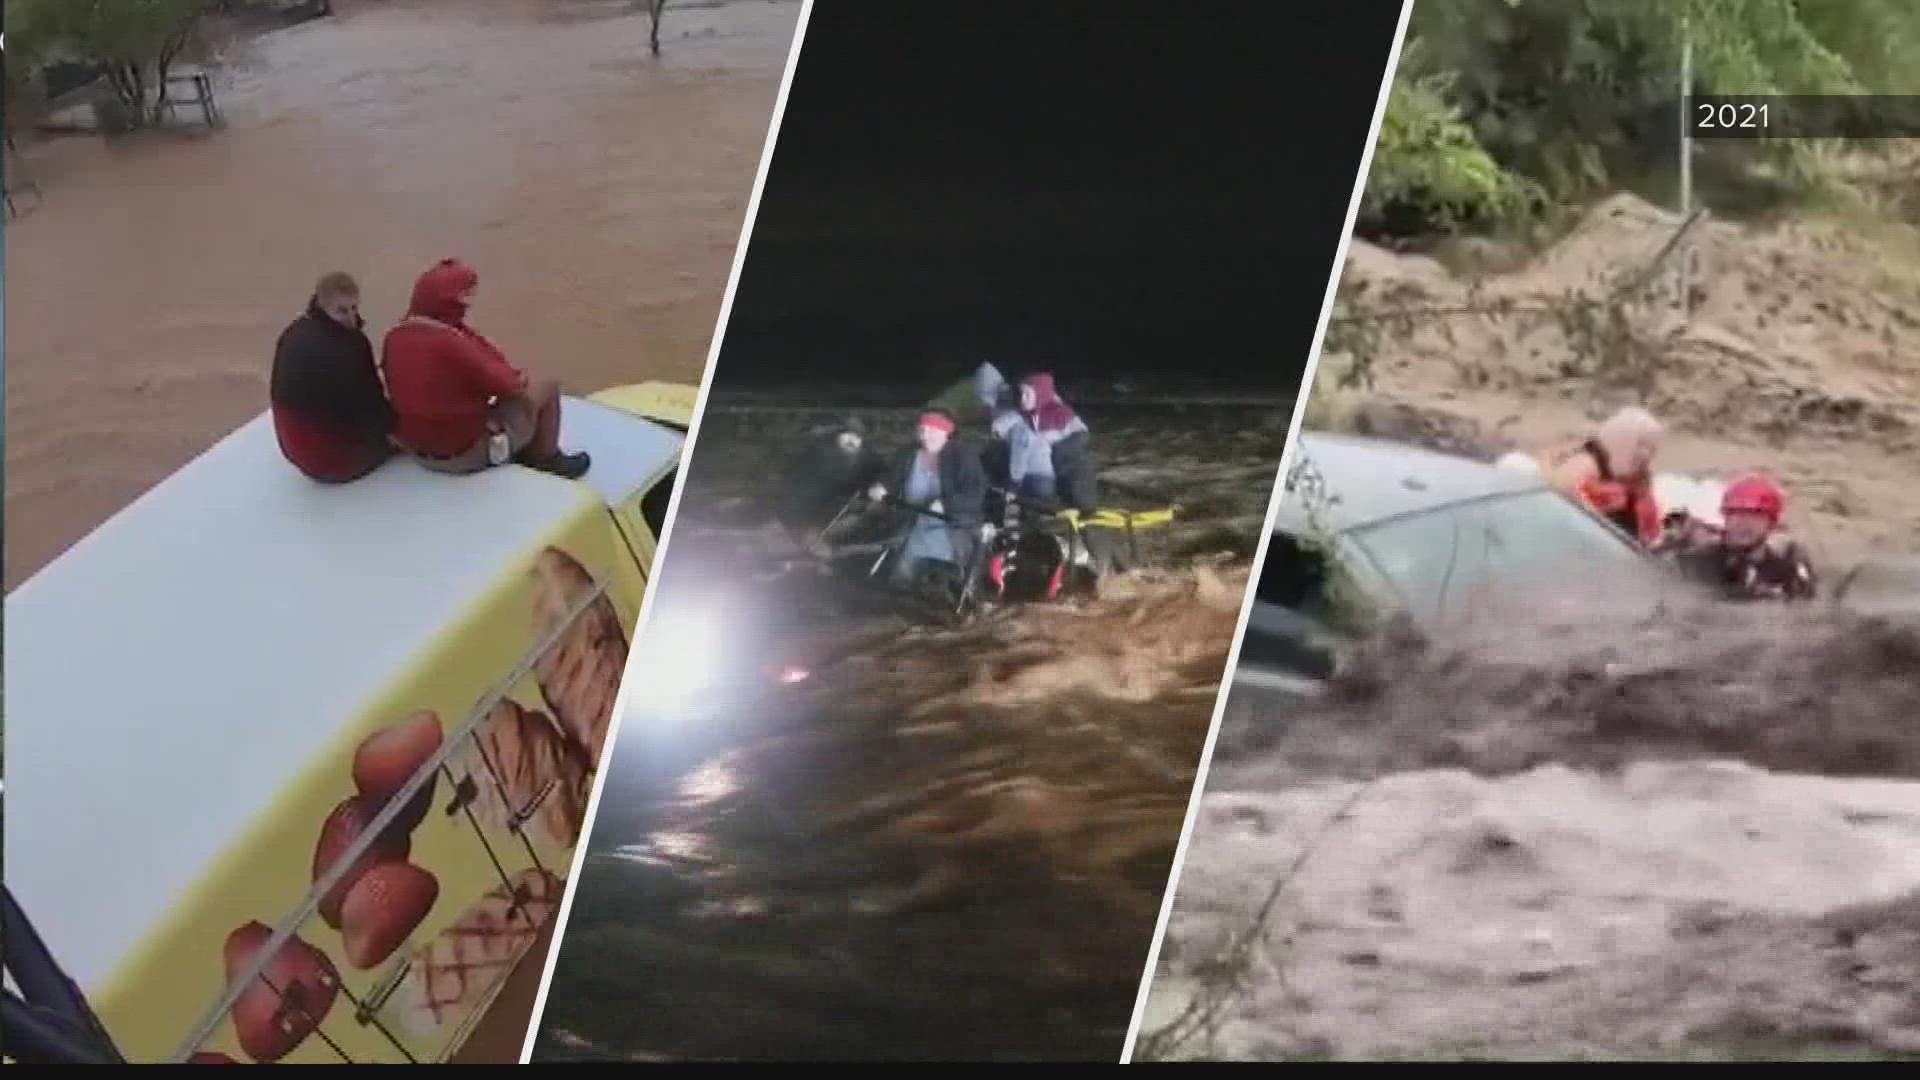 The Mohave County Sheriff’s Office said most of the water rescues they respond to are in the afternoon, evenings during the monsoon season.